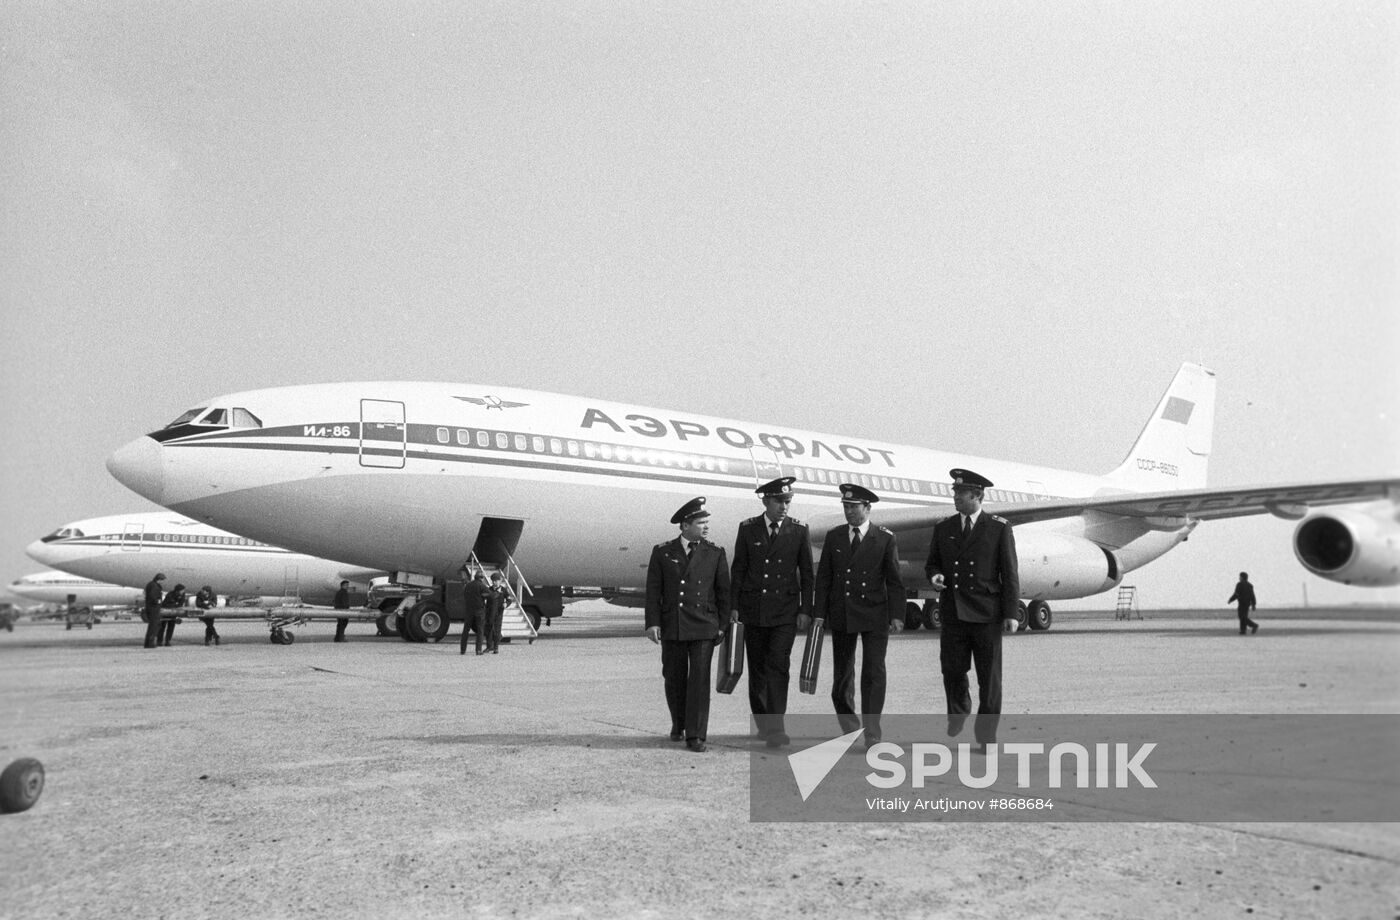 The crew of an Ilyushin Il-96 airliner